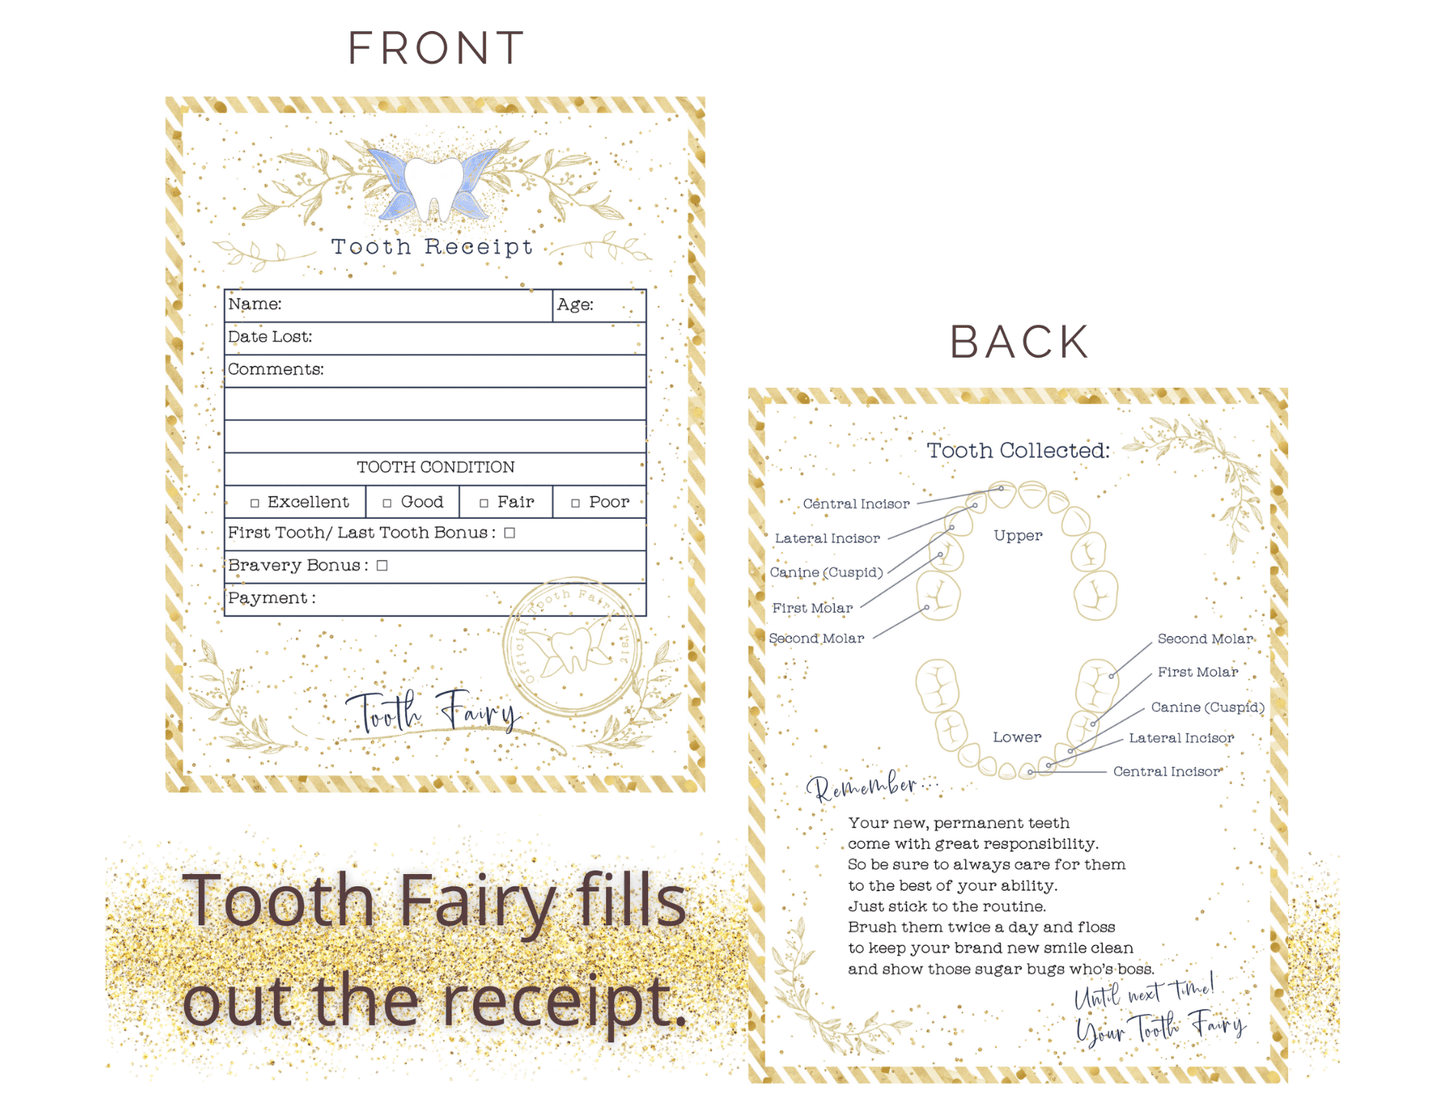 Tooth Fairy Receipt Cards, pack of 20, with 1 Soft Tooth Pouch